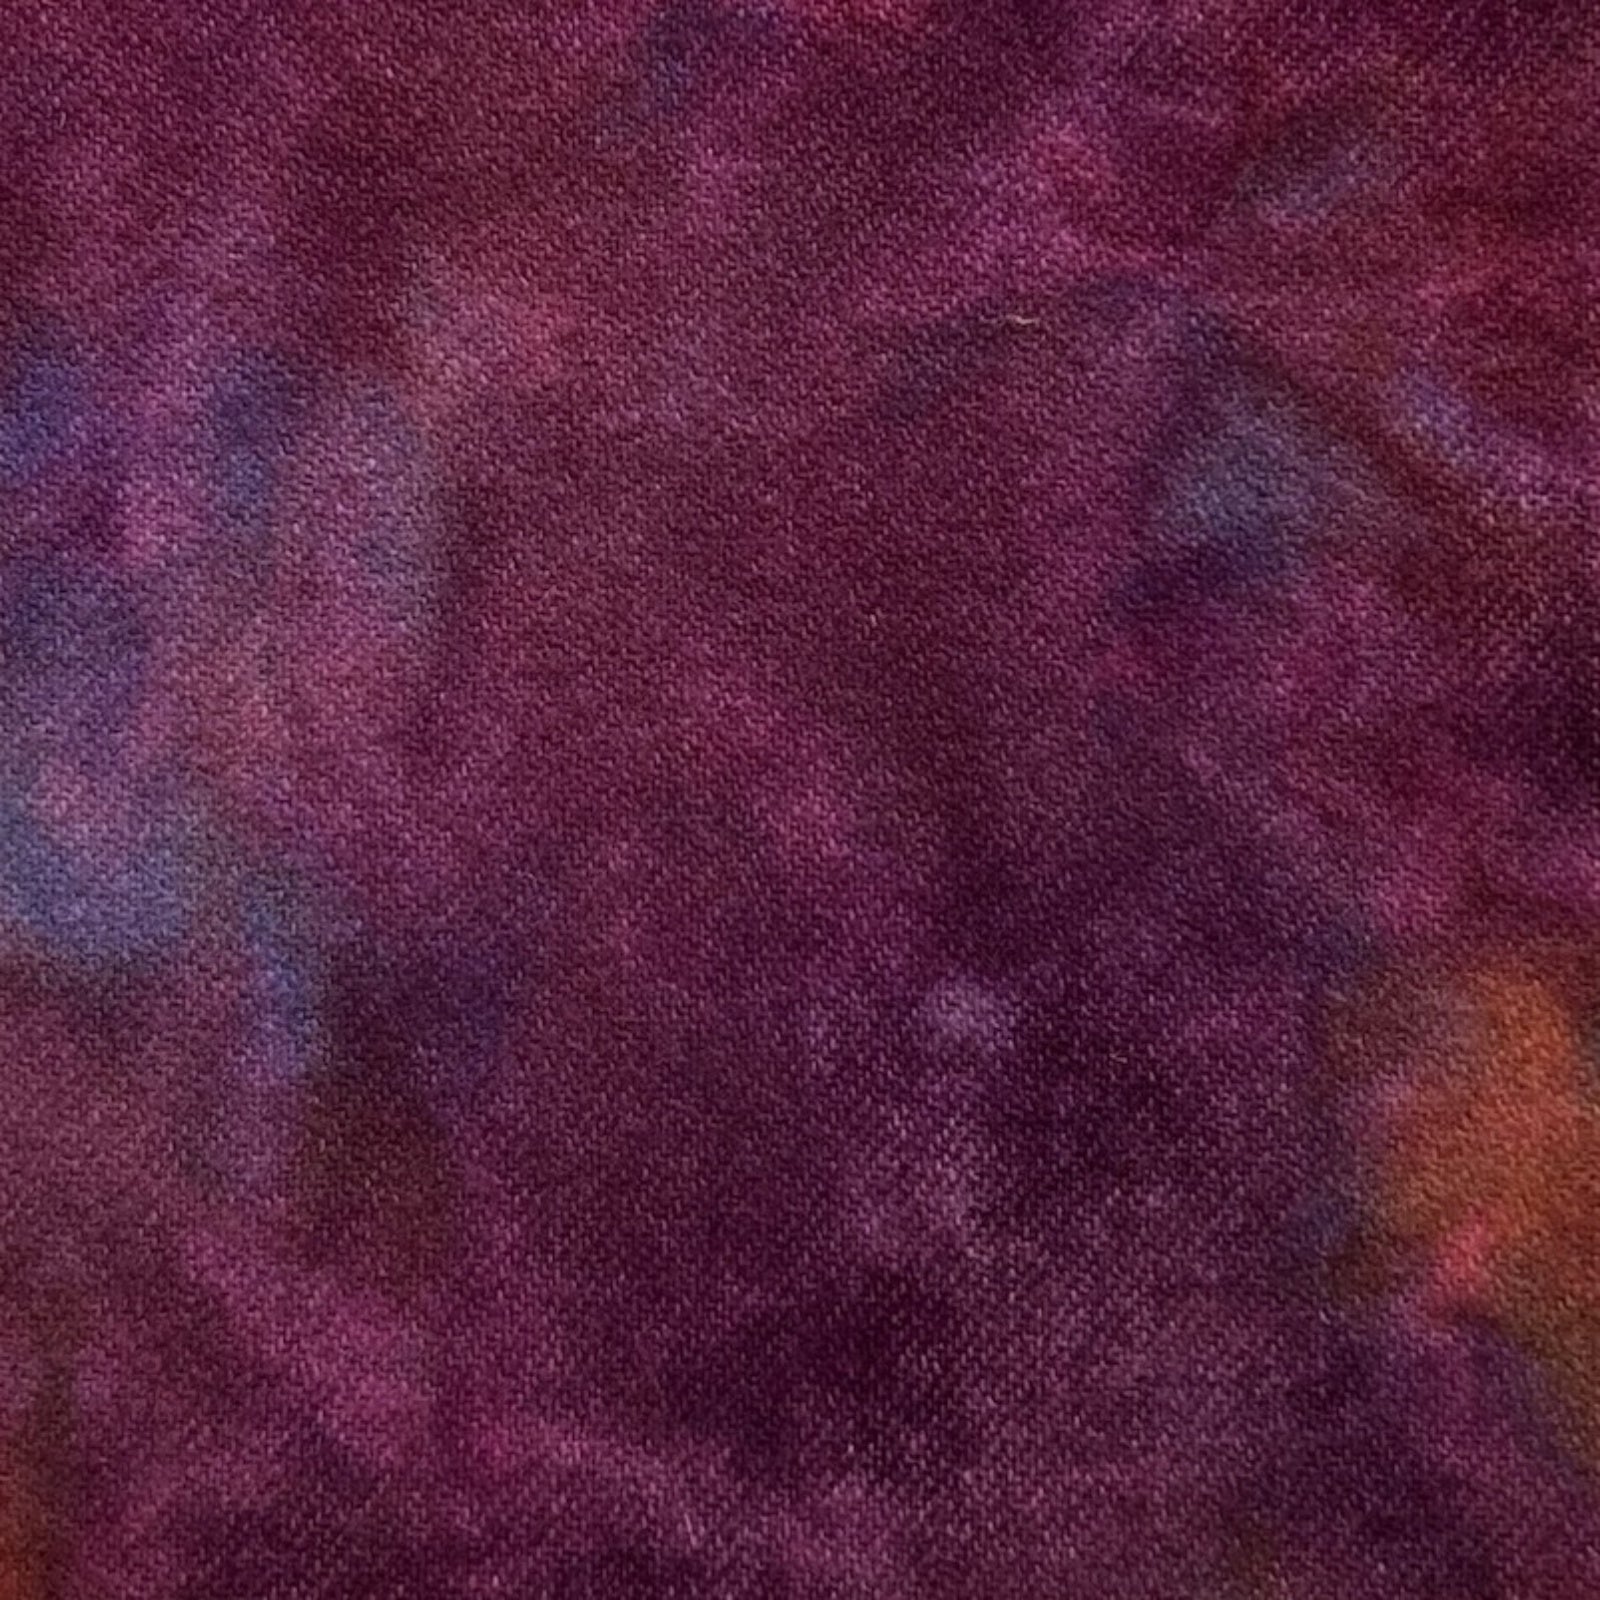 Rainbow - Colorama Hand Dyed Wool - Offered by HoneyBee Hive Rug Hooking